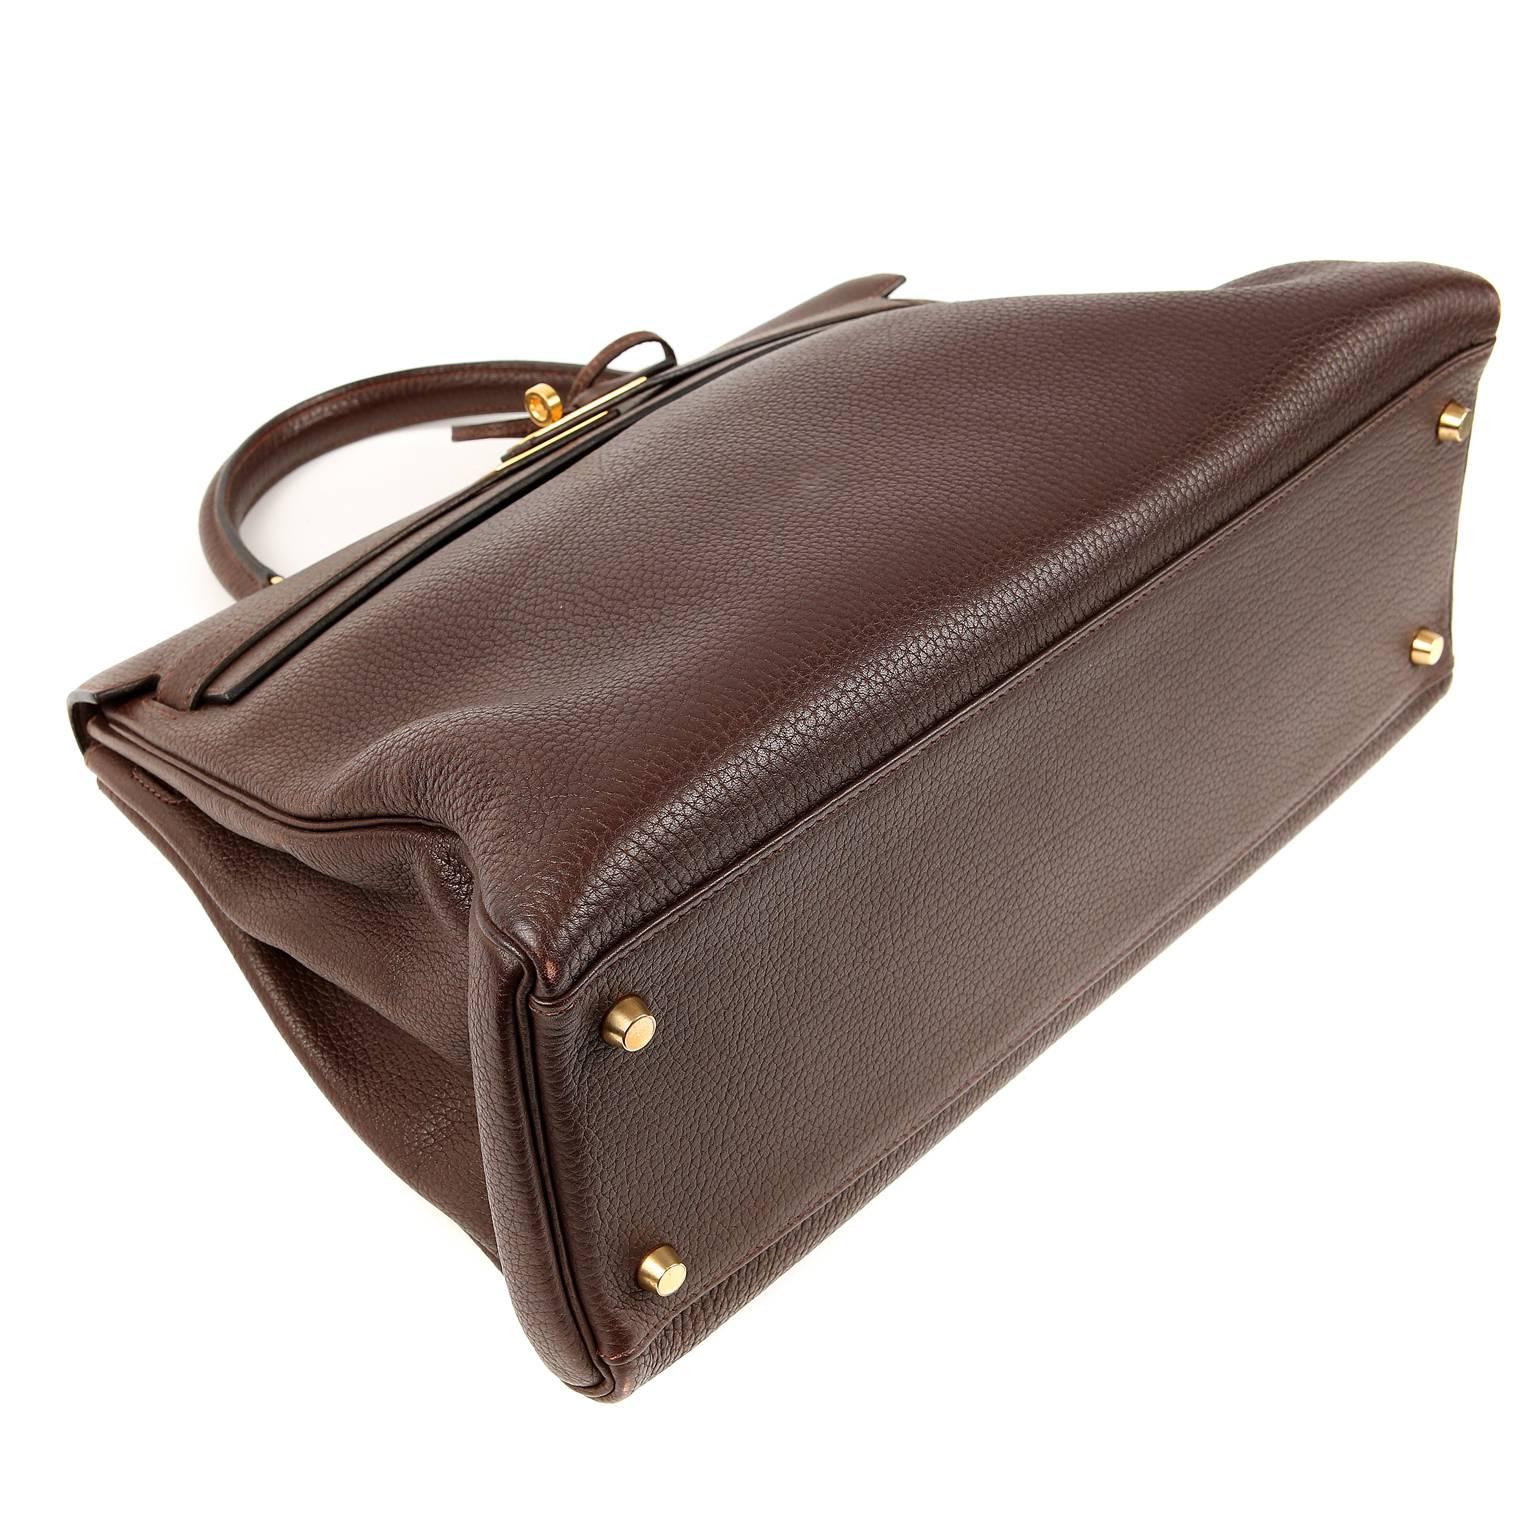 Hermès Cacao Togo 35 cm Kelly Retourne with Gold Hardware In Excellent Condition For Sale In Malibu, CA